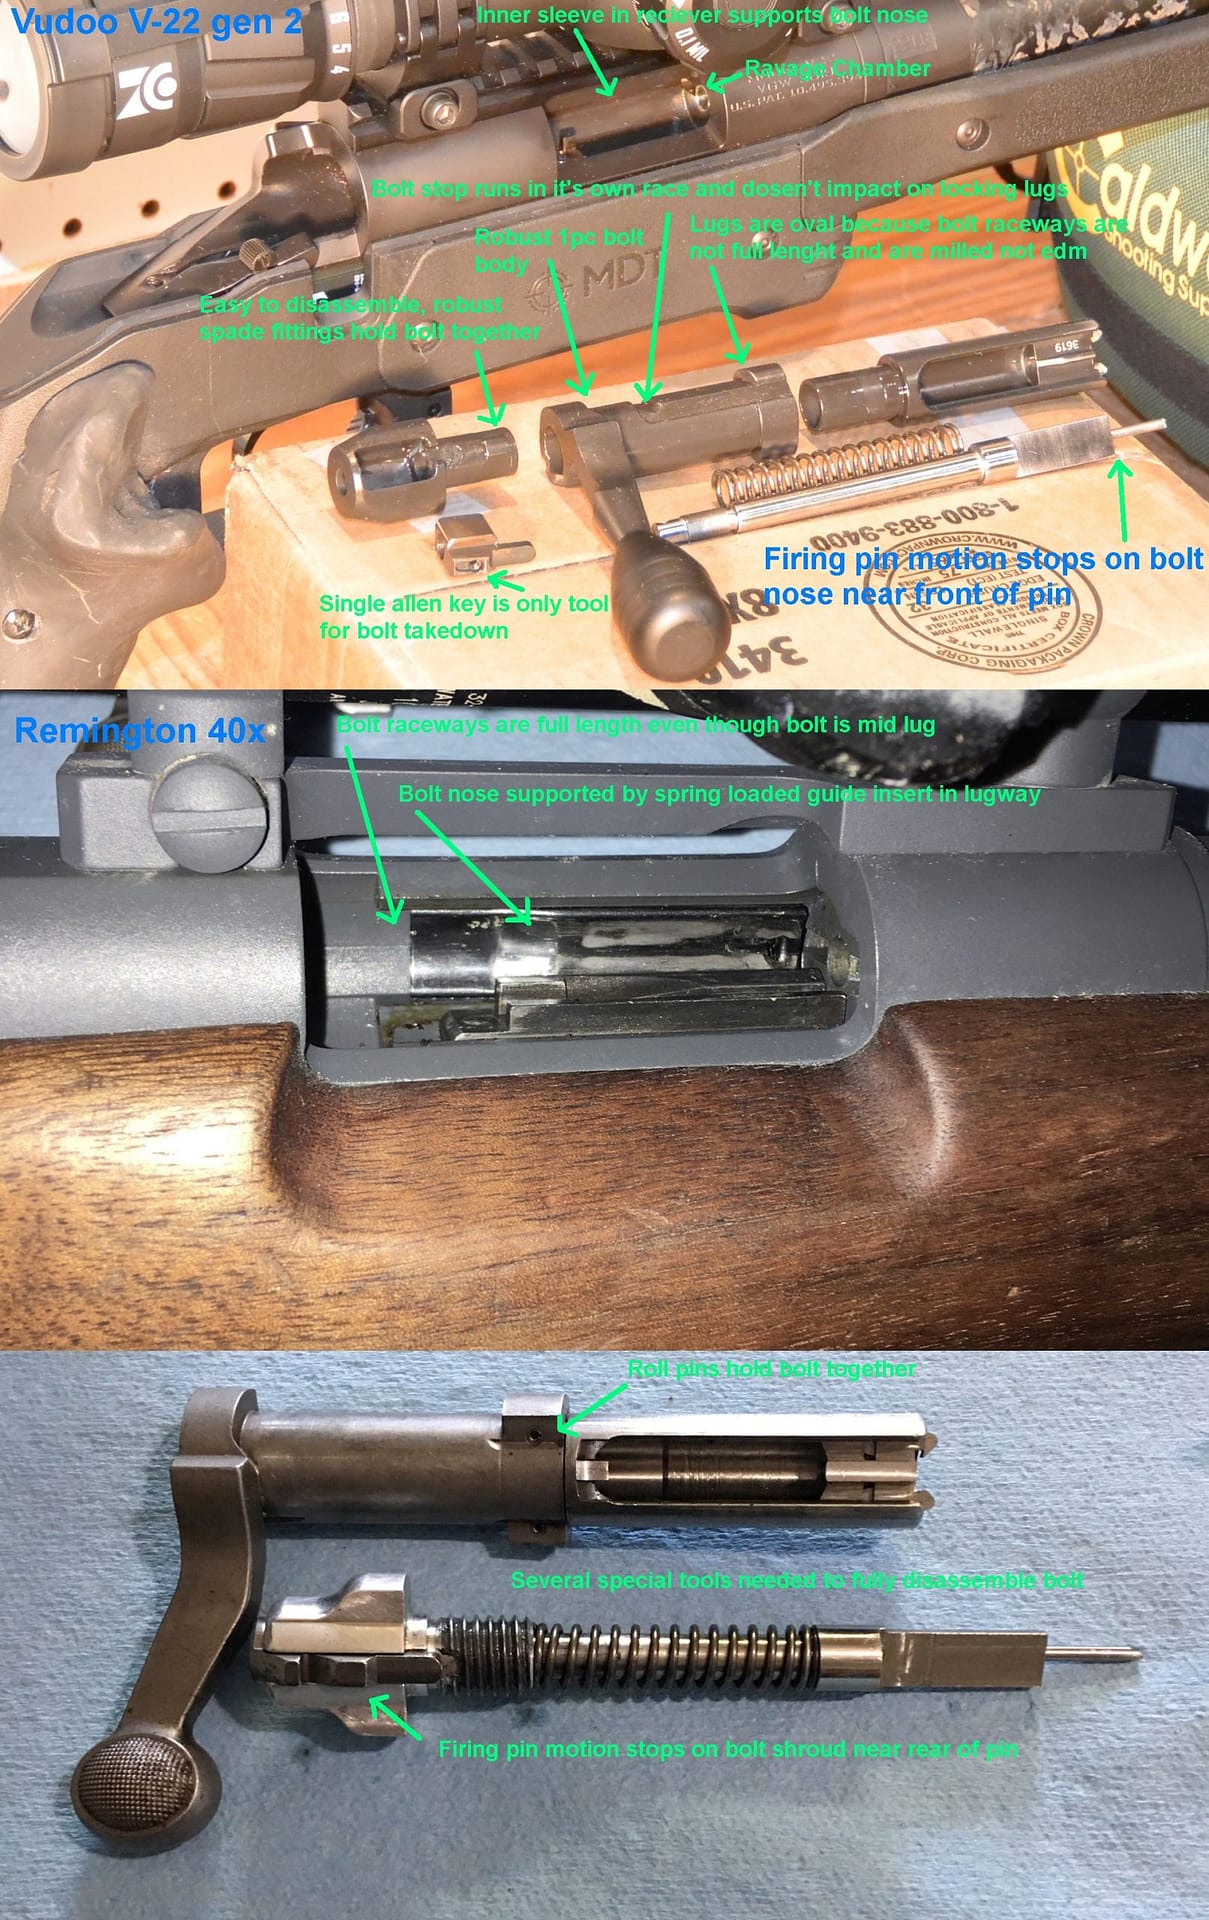 Image illustrating the key engineering differences between a Vudoo V-22 and a Remington 40x action.